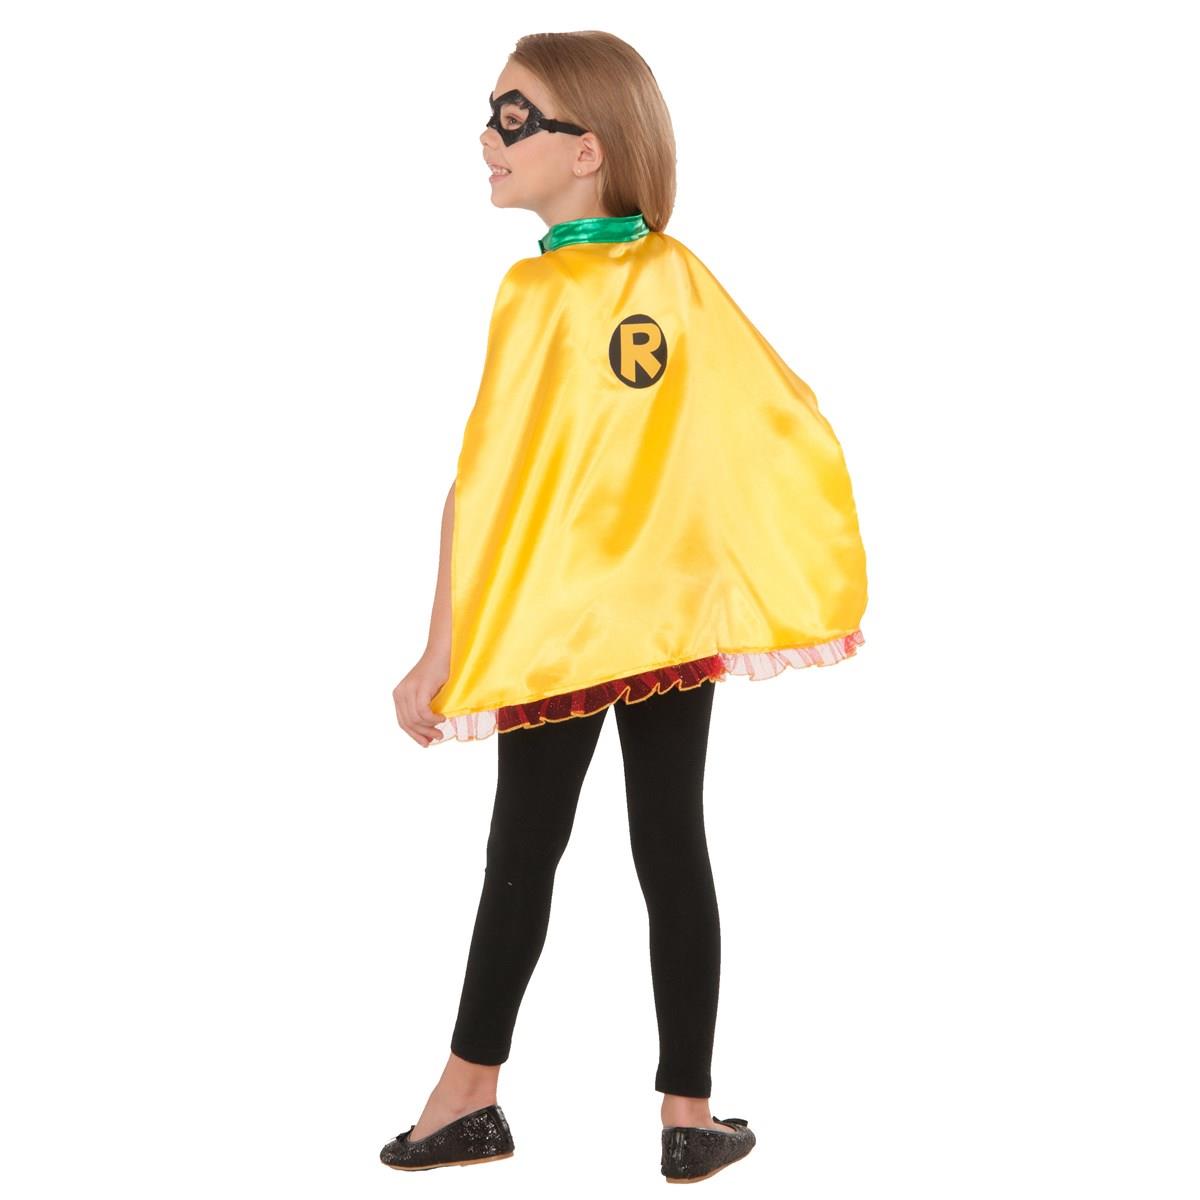 Picture of Imagine 274588 Robin Mask & Cape Set - One Size